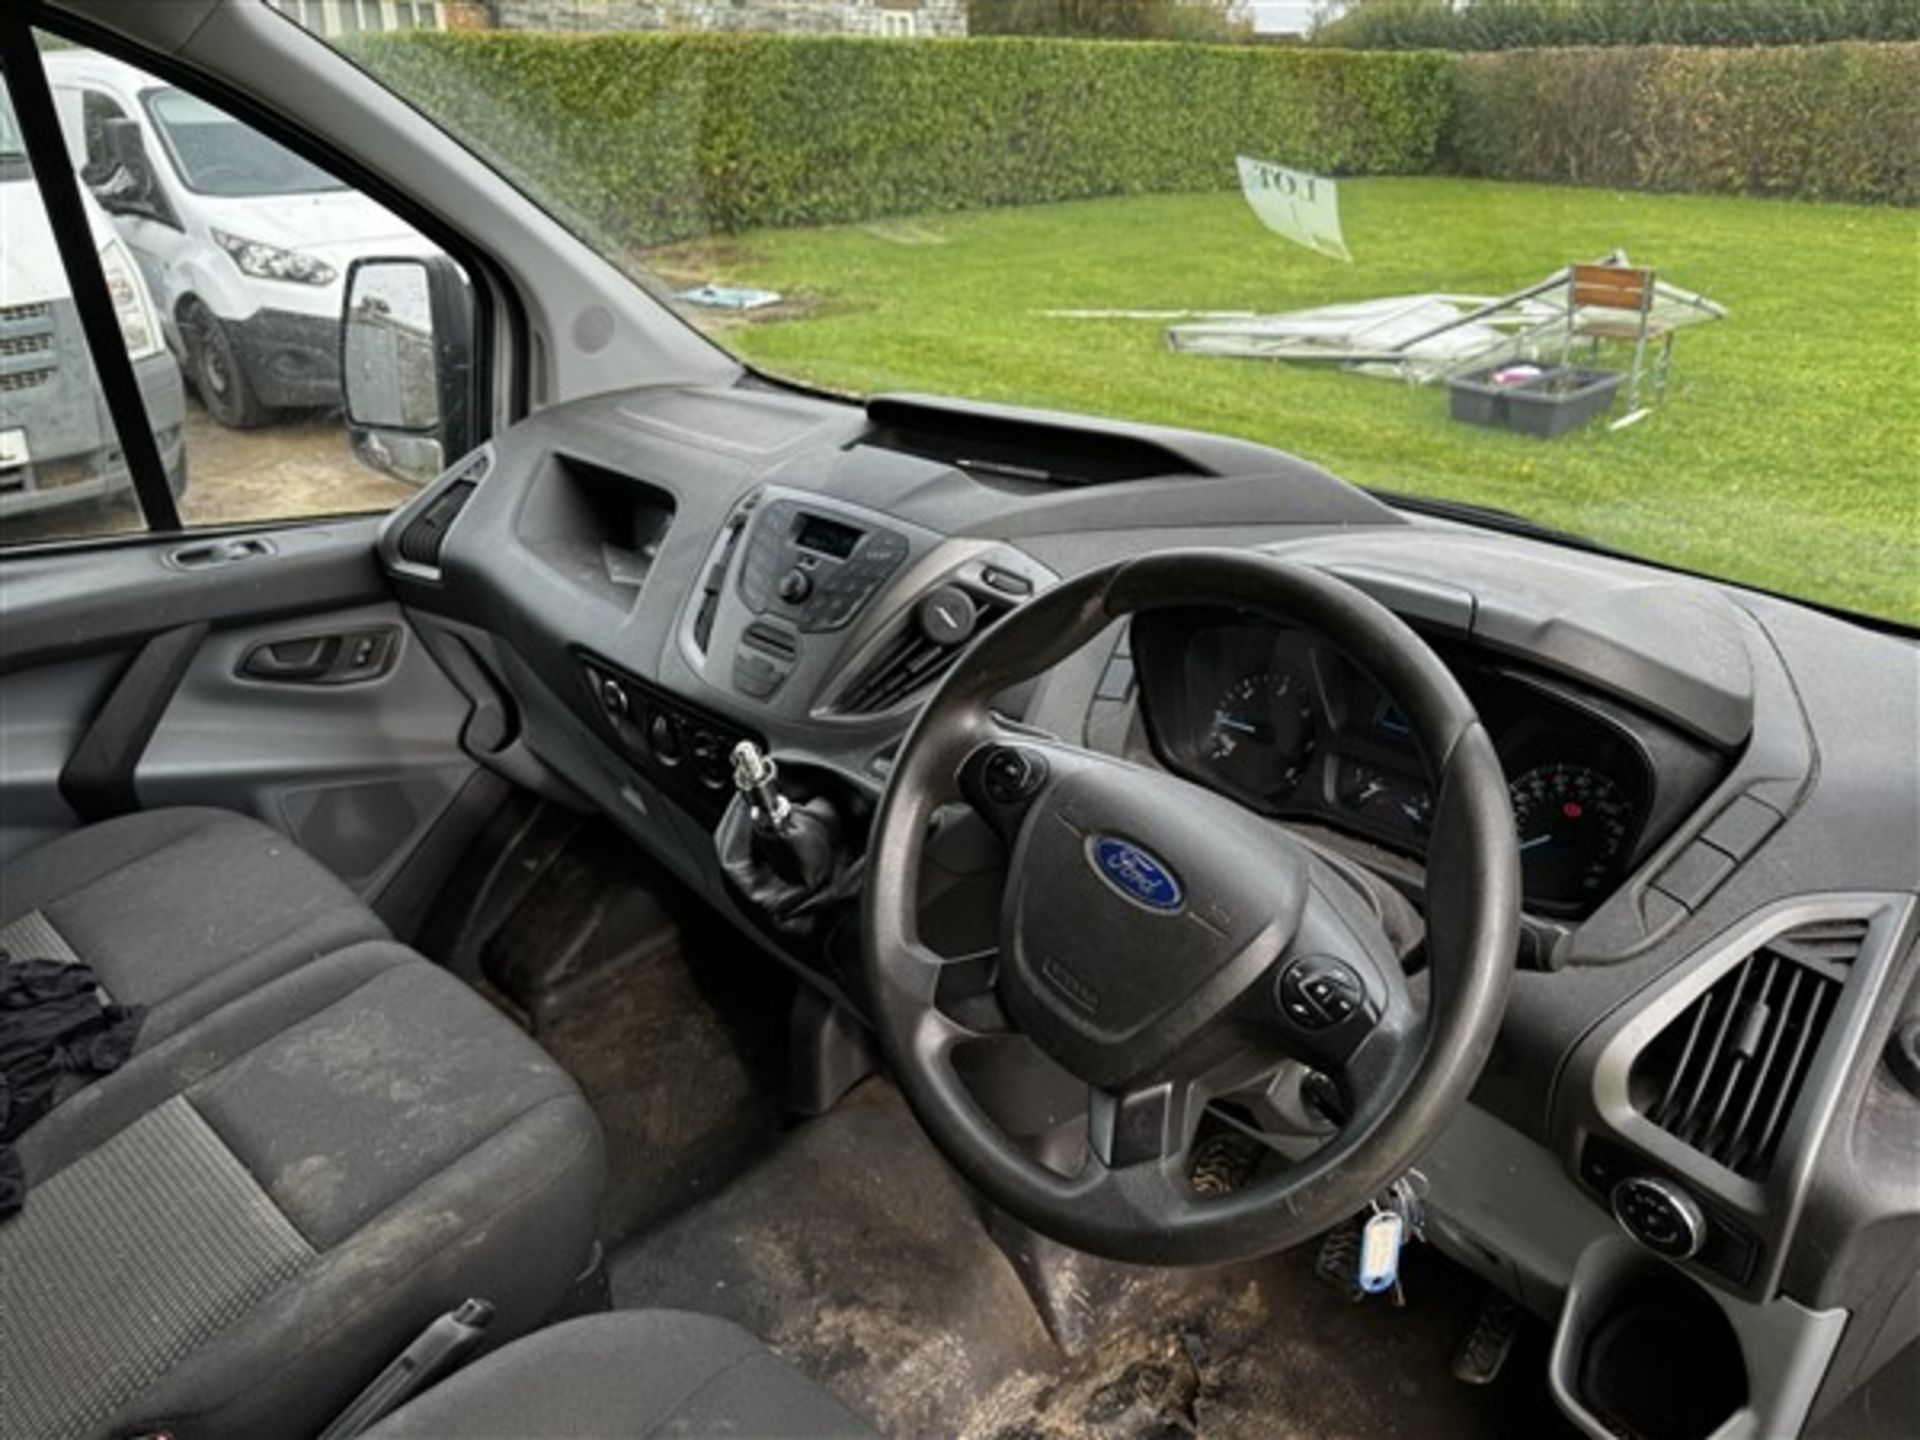 Ford Transit Custom 270 Eco-Tech, reg no. YK16 BYP mileage 227,019, two keys, V5 - yes, missing gear - Image 6 of 14